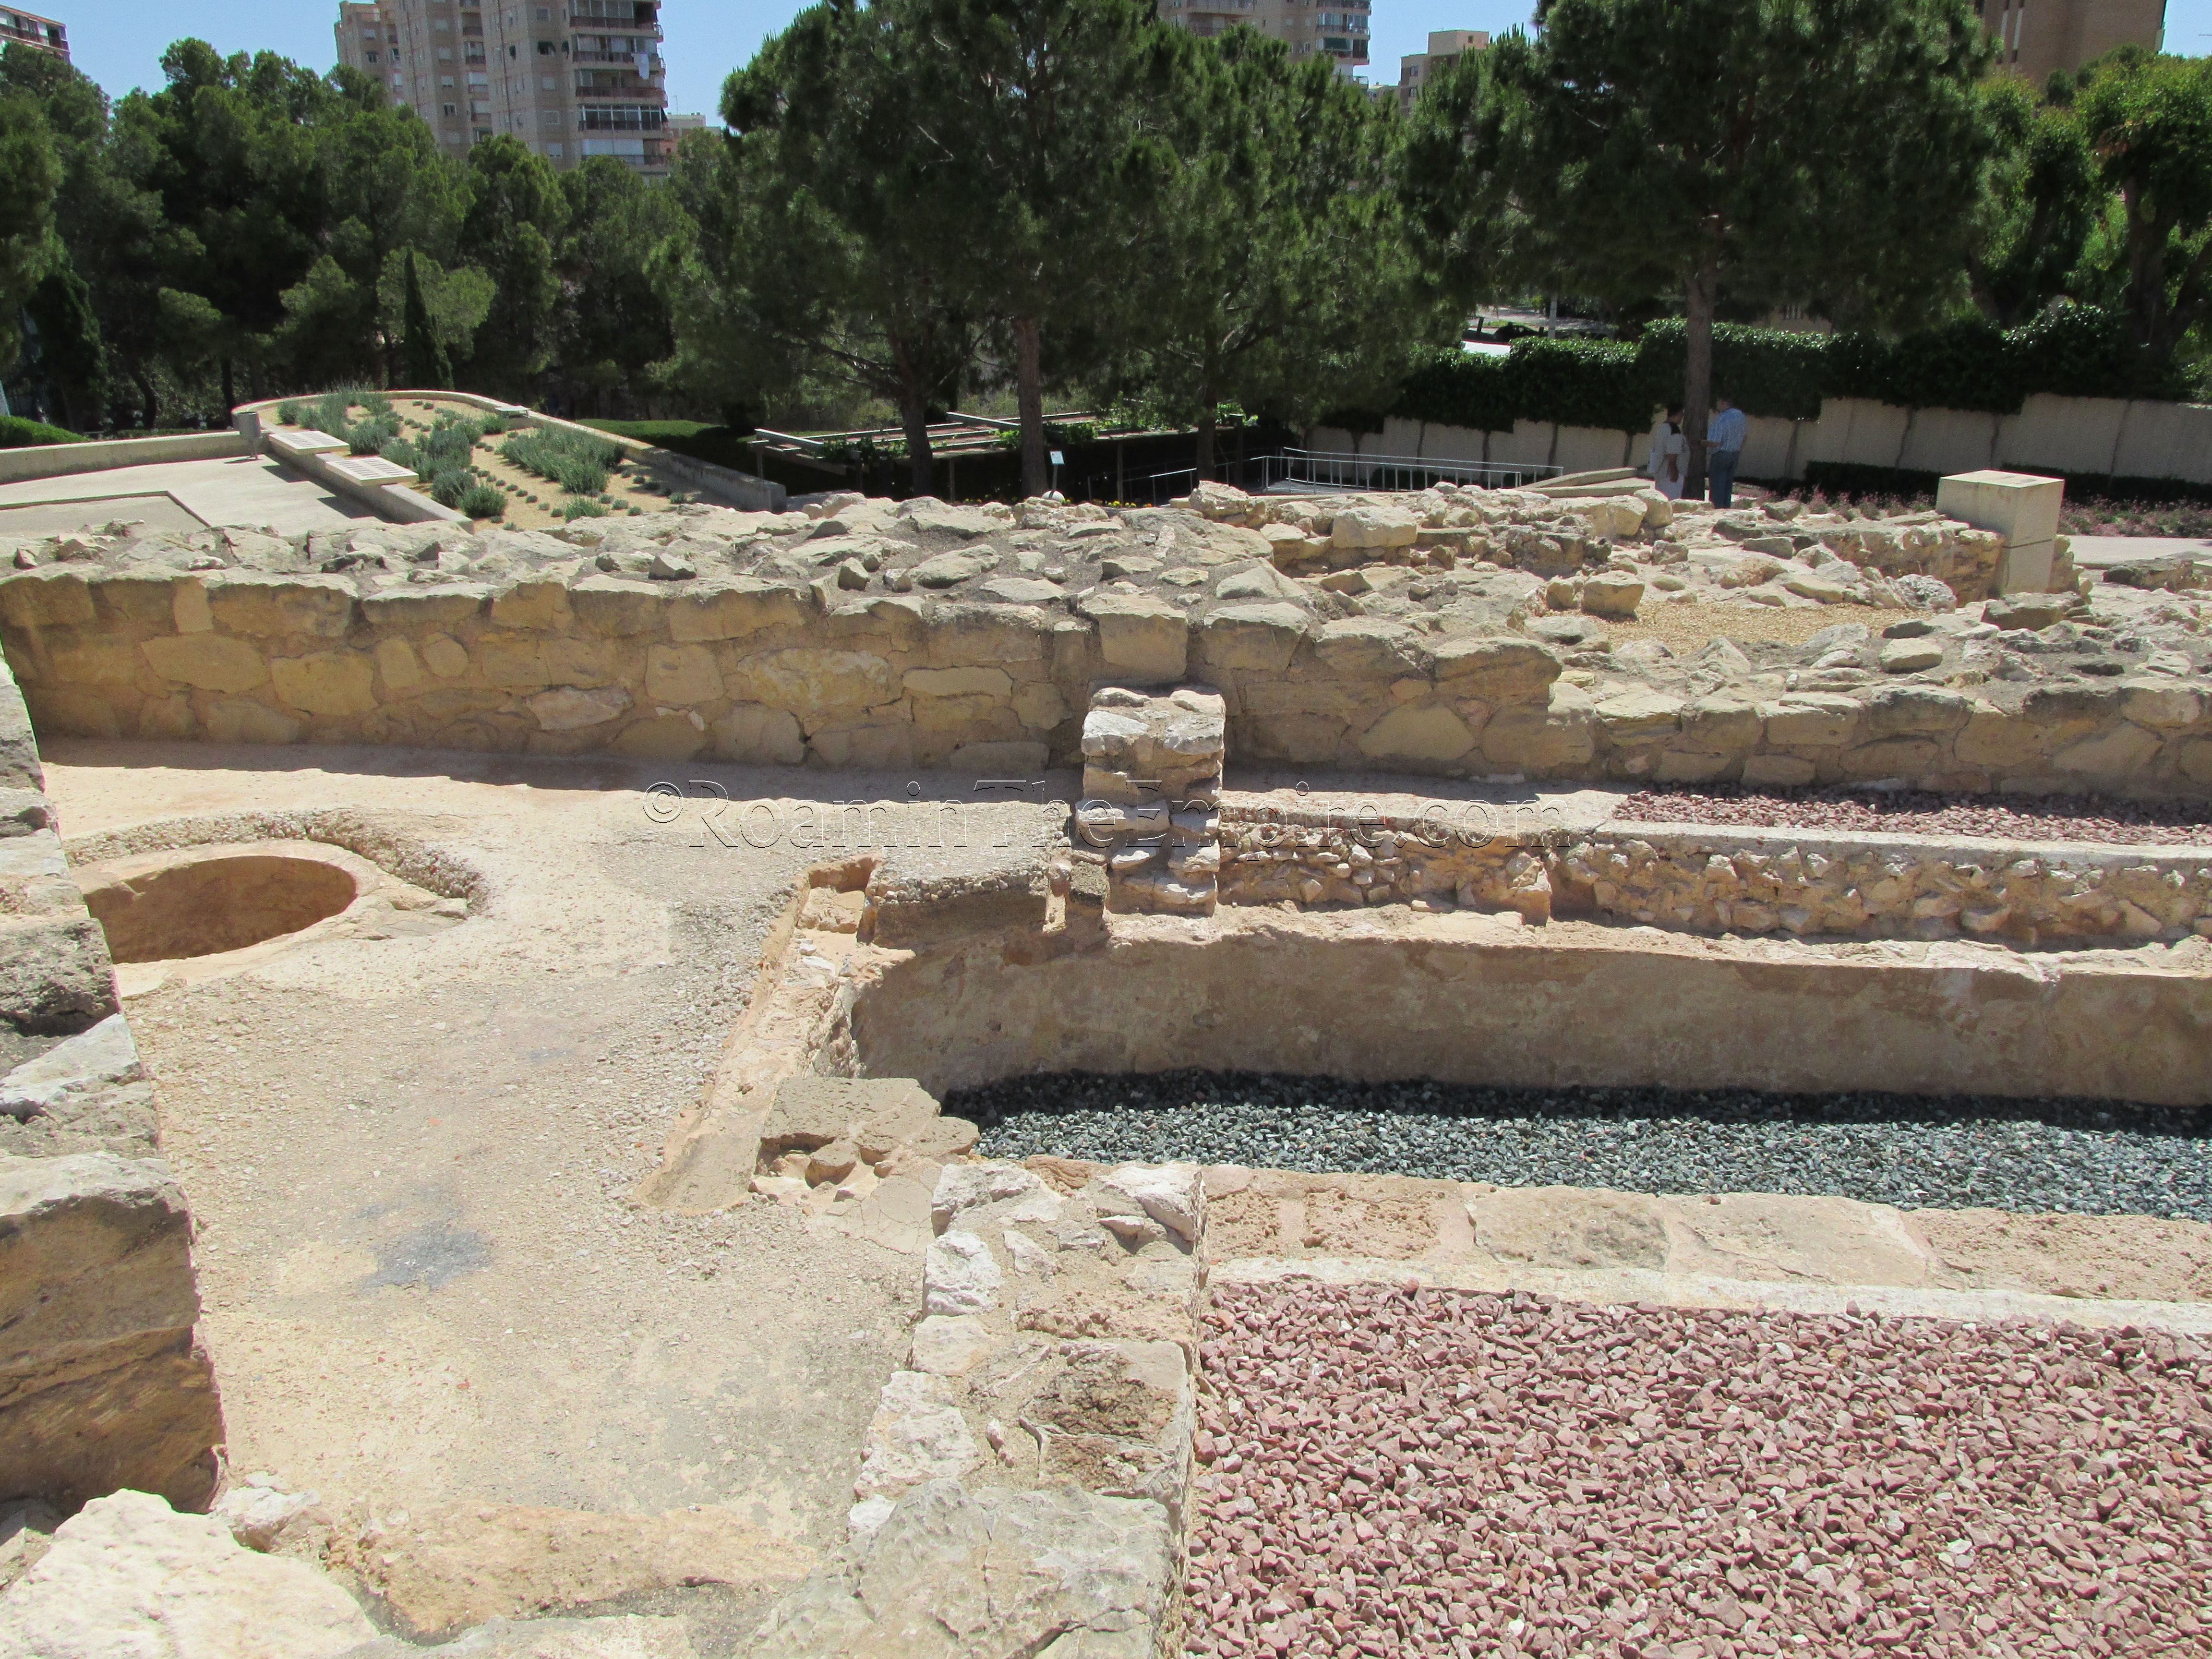 Section of a domestic structure with a well and cistern, probably of Carthaginian design.